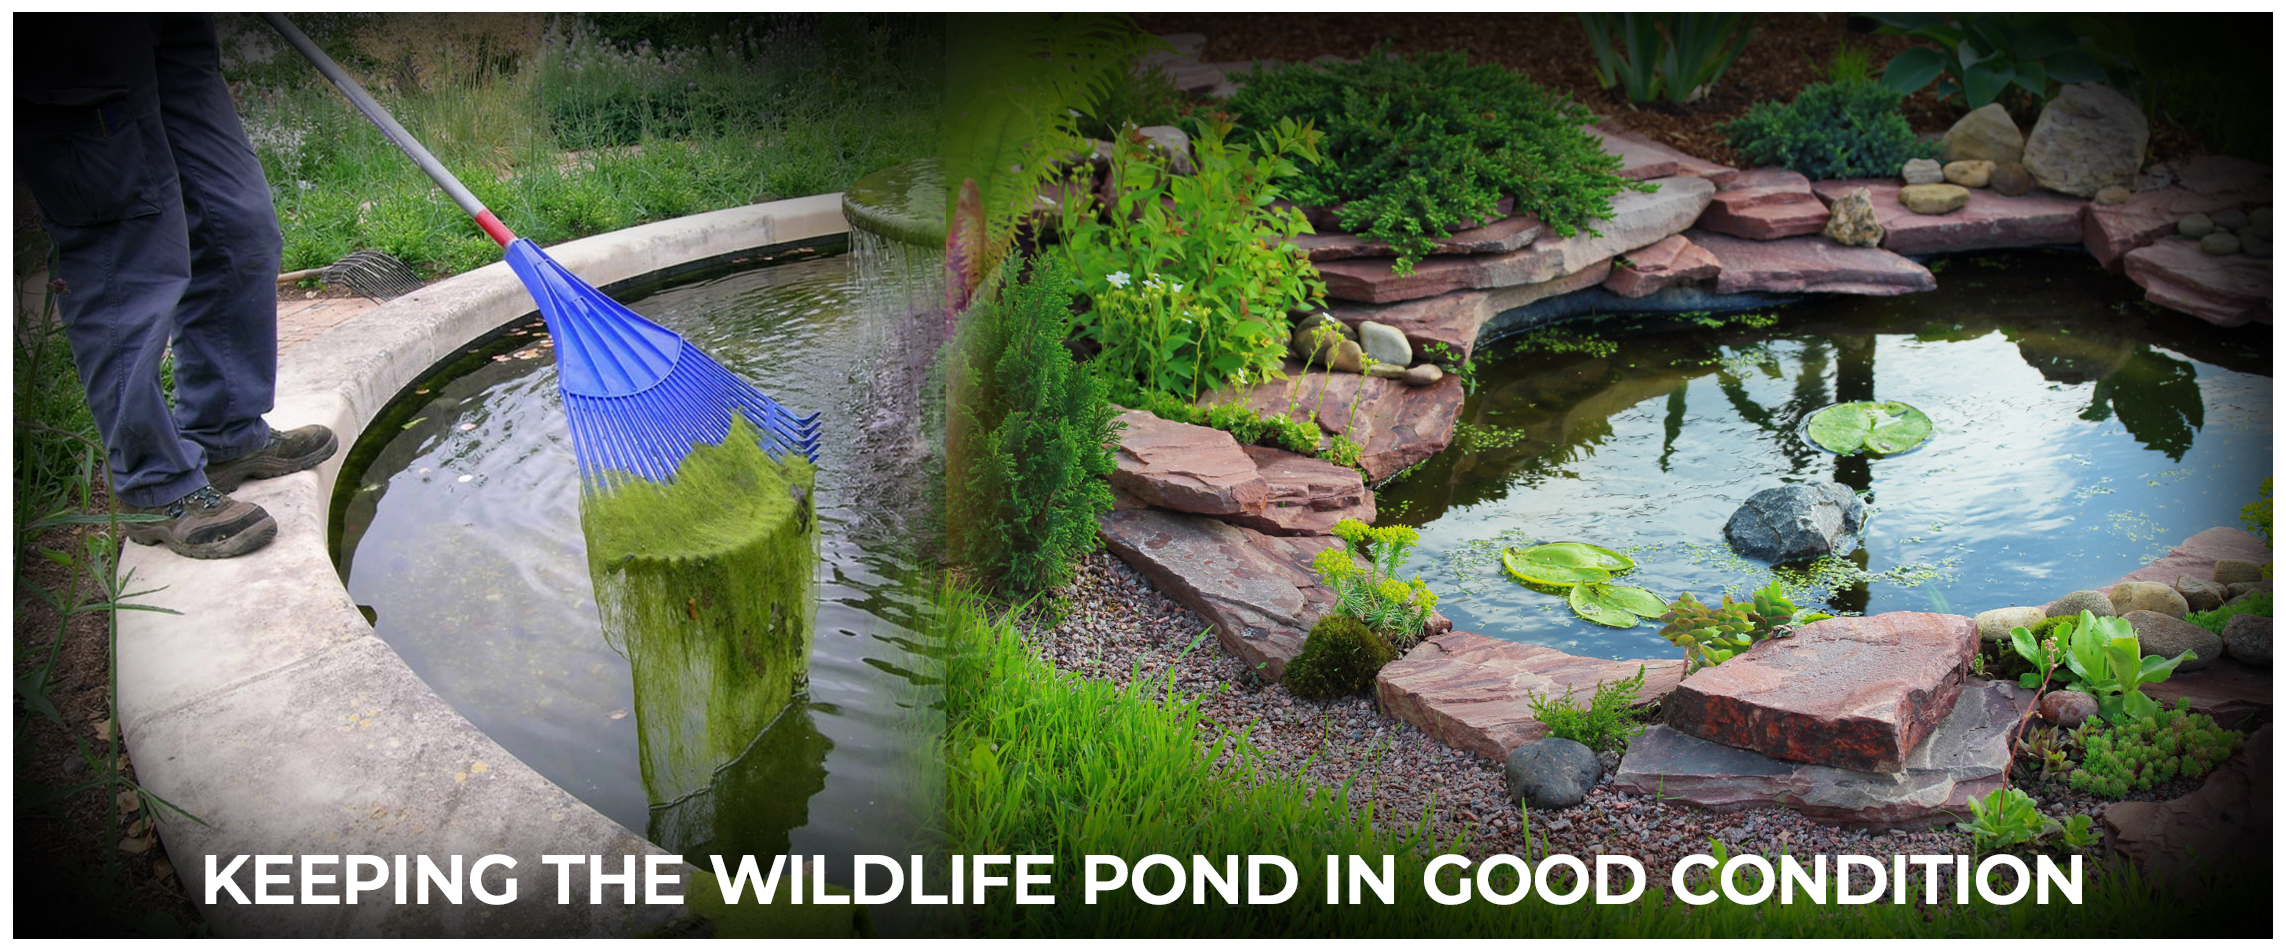 Keeping the Wildlife Pond in Good Condition